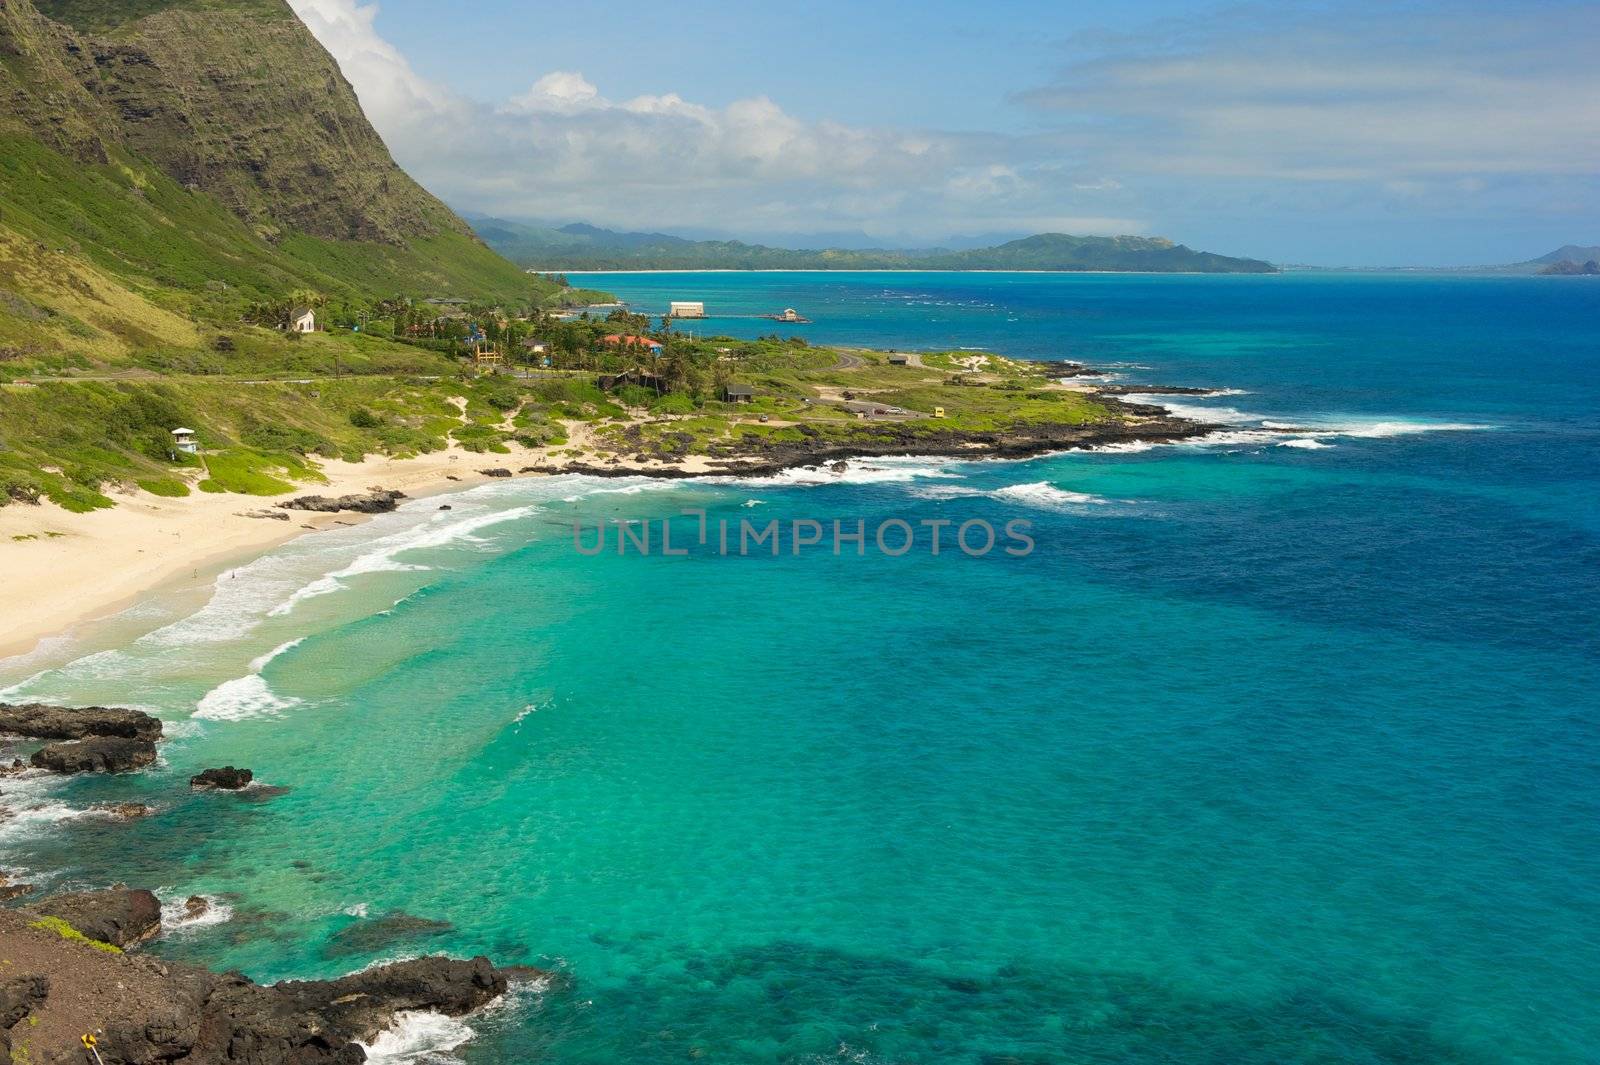 Oahu Small Town Near Cliffs by pixelsnap